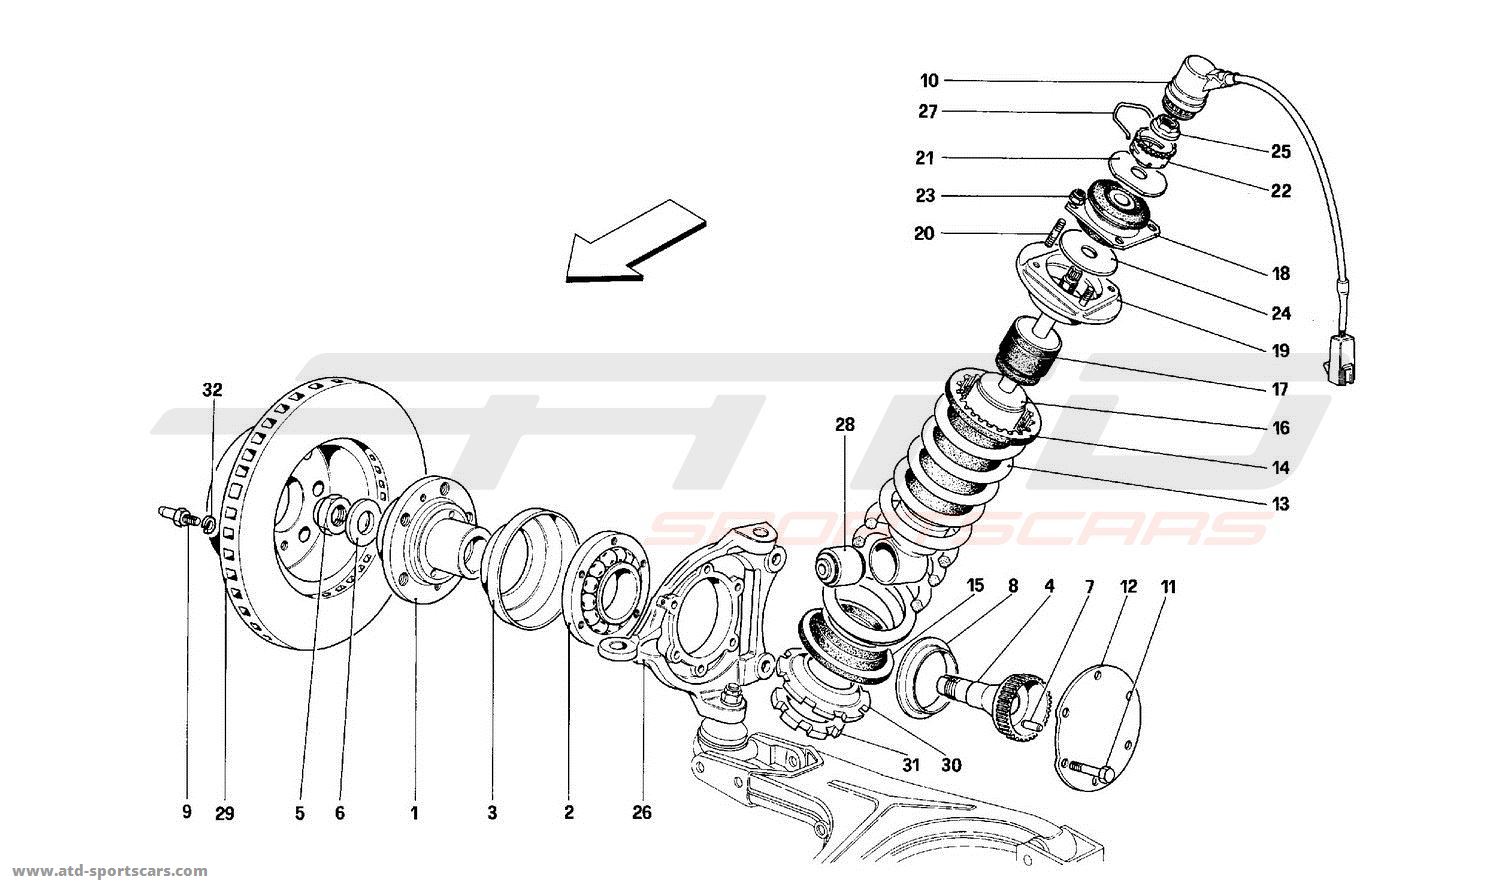 FRONT SUSP. - SHOCK ABSORBER AND BRAKE DISC